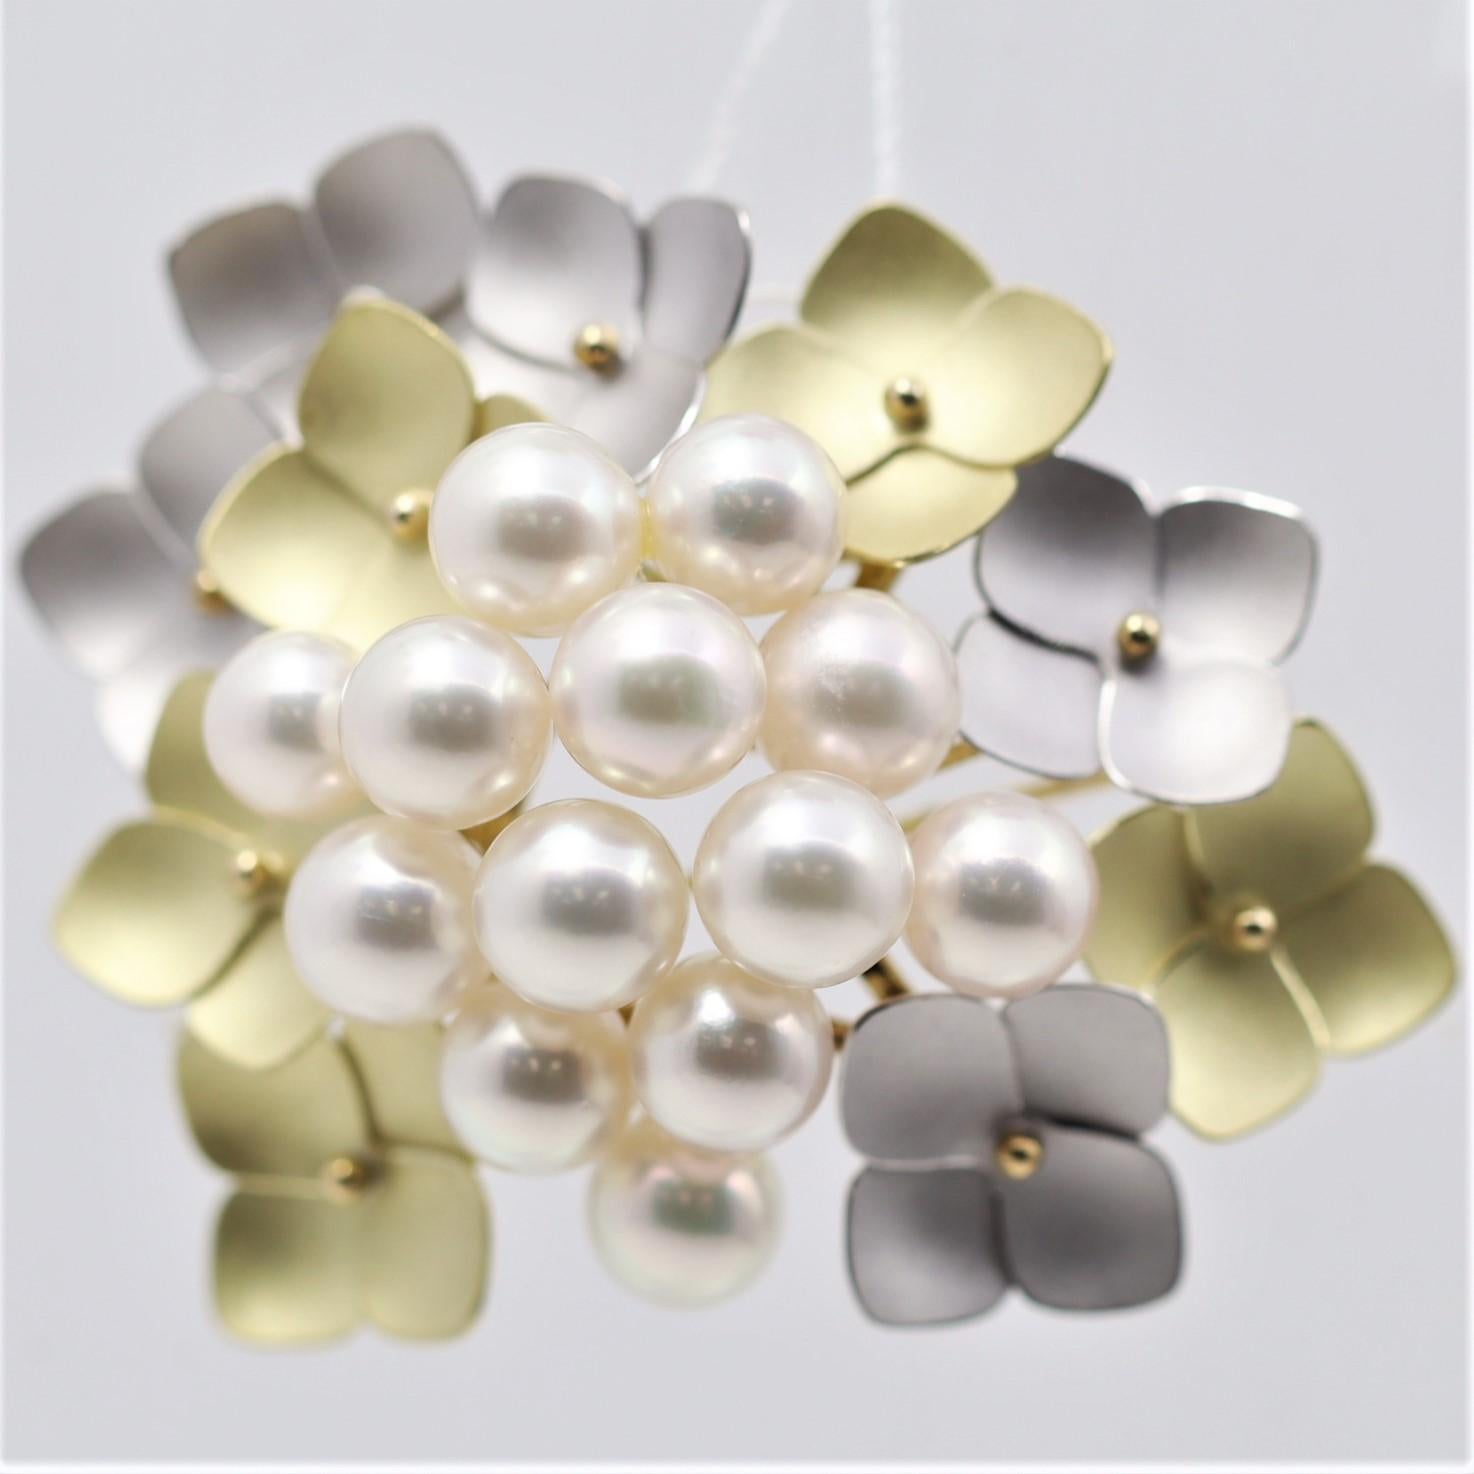 A delightful piece featuring a cluster of extra fine Akoya pearls with excellent nacre quality and a lovely pink overtone which makes the pearls glow. It is surrounded by hand sculpted gold flowers made in both 18k yellow gold and 14k white gold